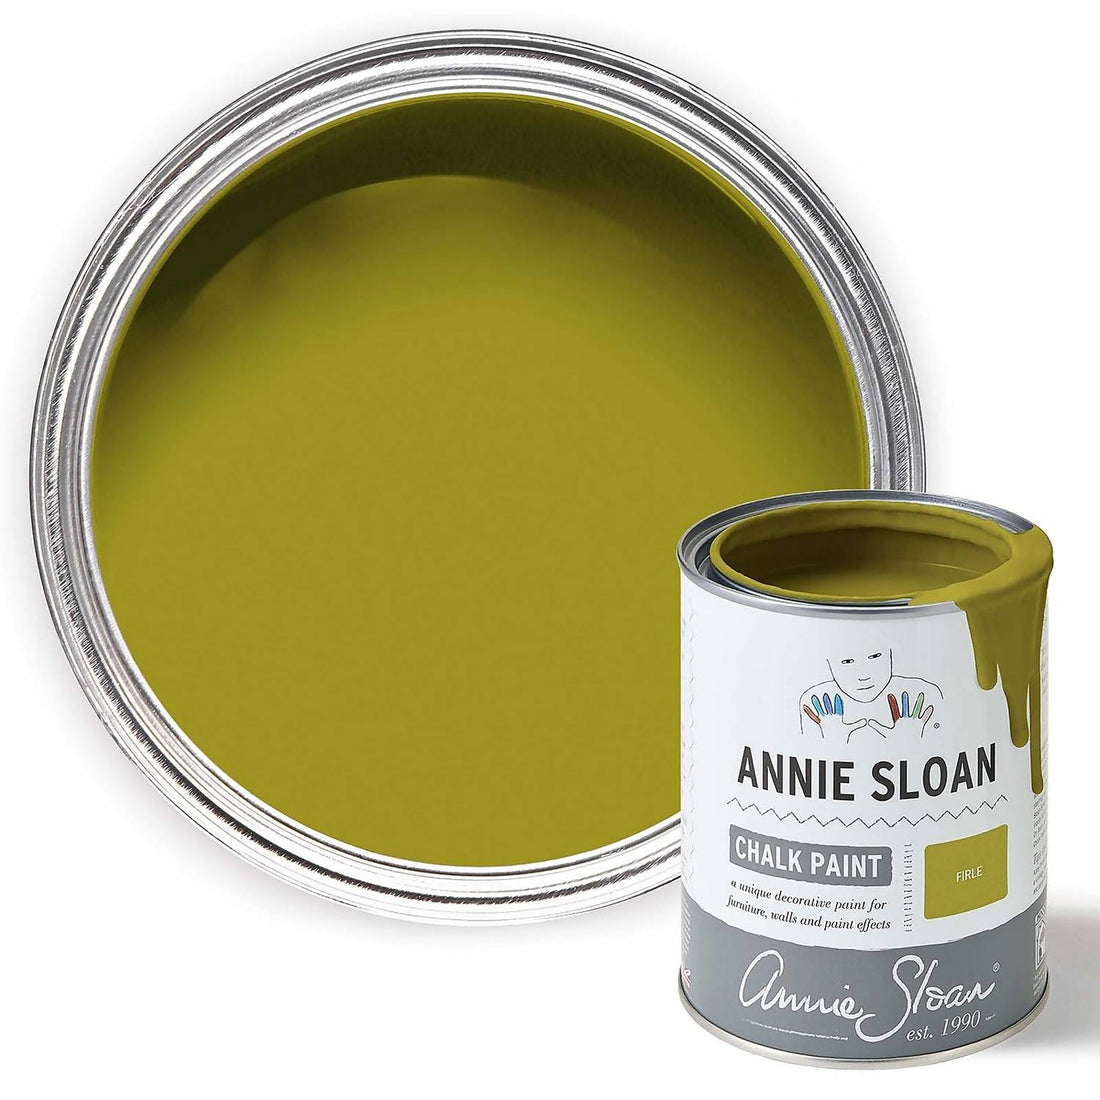 Annie Sloan Paint and Ideas!!